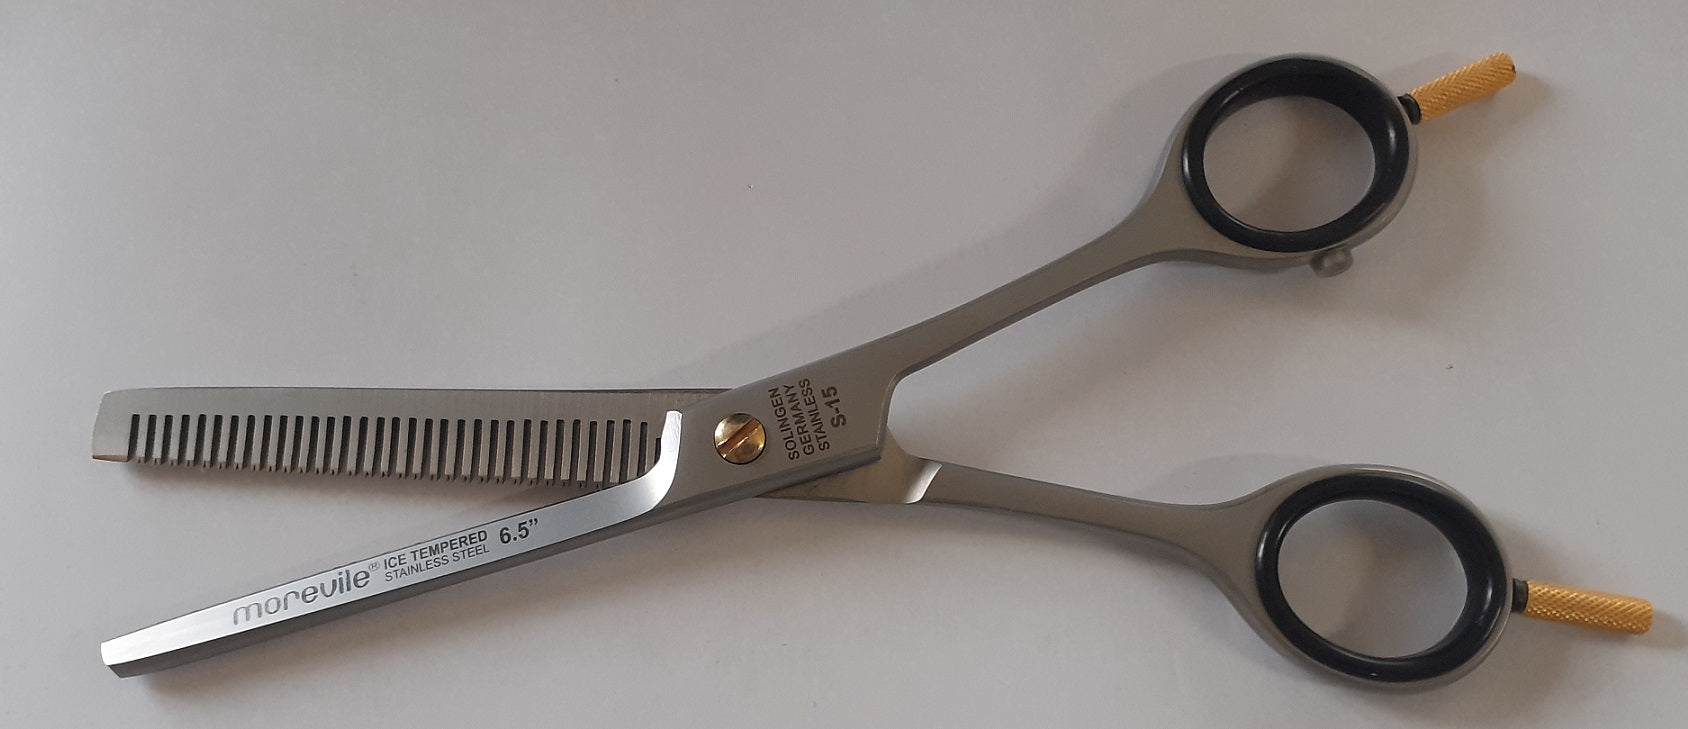 Morevile German Thinning Shear 6.5" with 33 Teeth